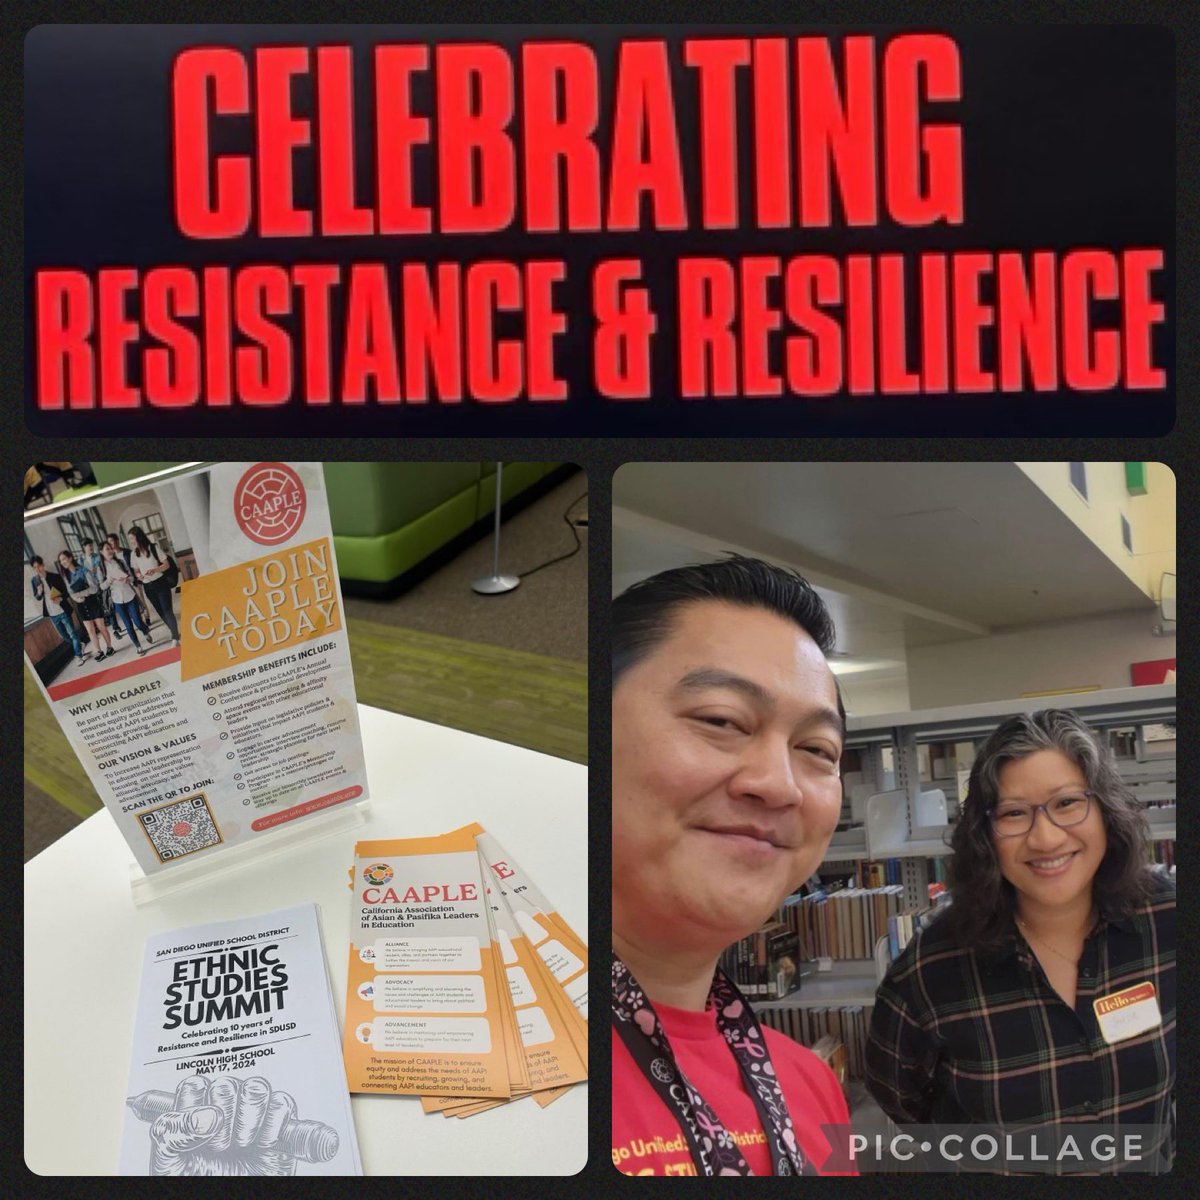 Shout out to CAAPLE Region 8! Amazing highlights for #AANHPIHeritageMonth, collaborating with @SanDiegoCOE to share stories about culture & identity, having AA educators share their testimonies, & representing @sandiegounified Ethnic Studies Summit! #CAAPLEproud